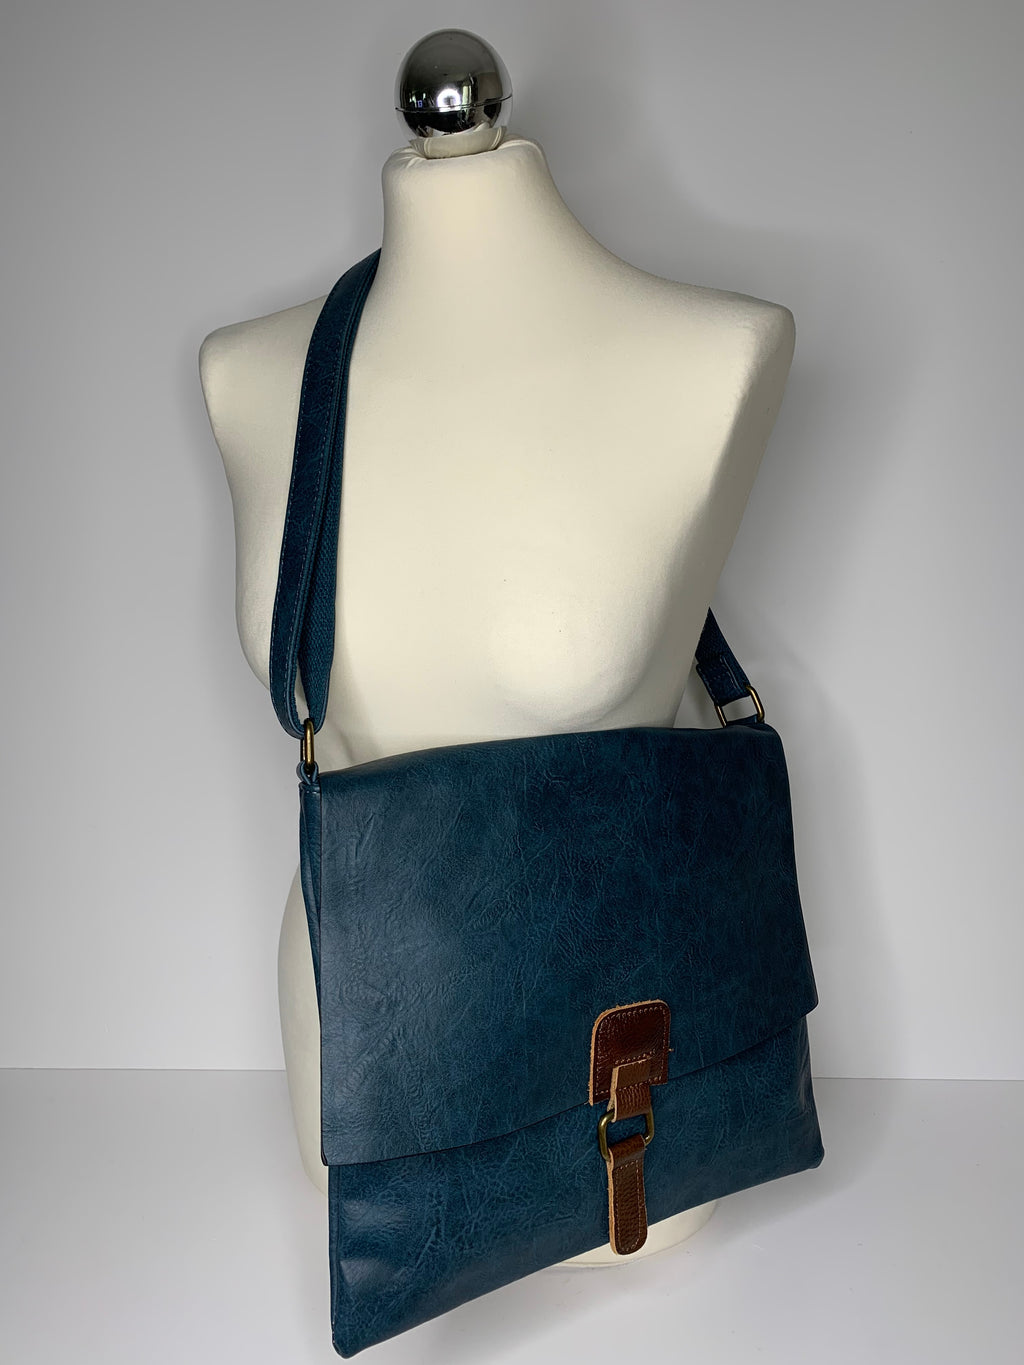 Vegan leather, cross-body satchel bag with top zip, magnetic dot closure and adjustable strap in lakeland blue